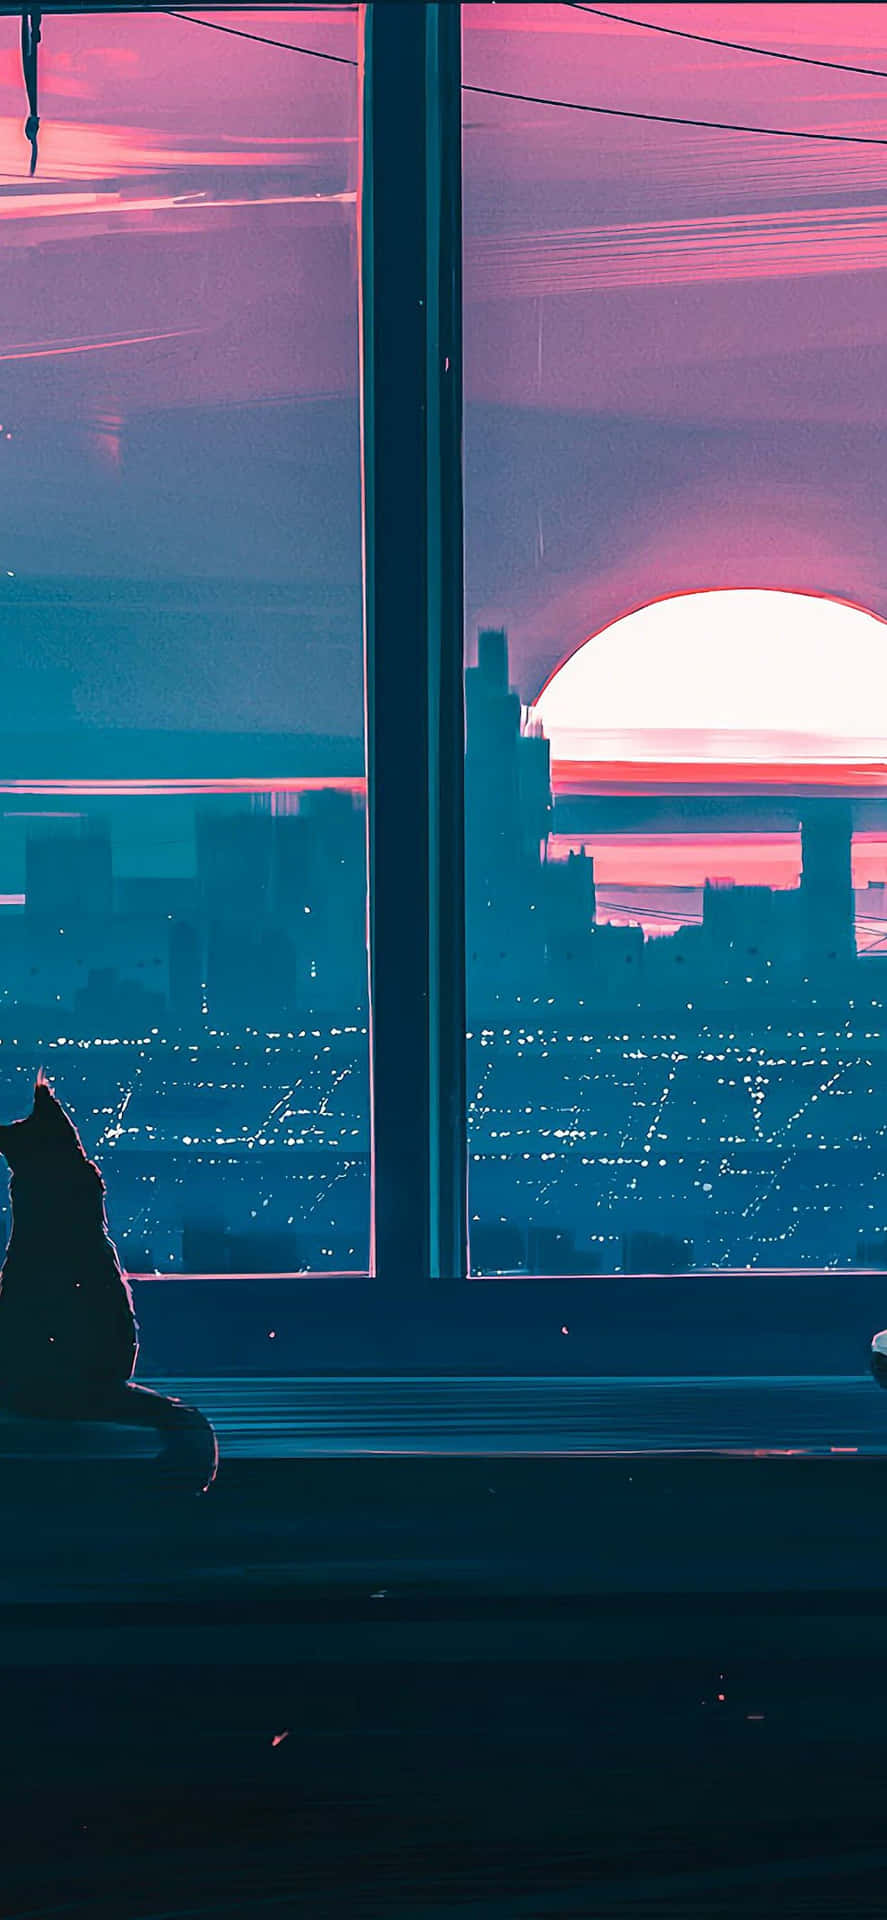 Embrace the warmth of the Anime Sunset Wallpaper